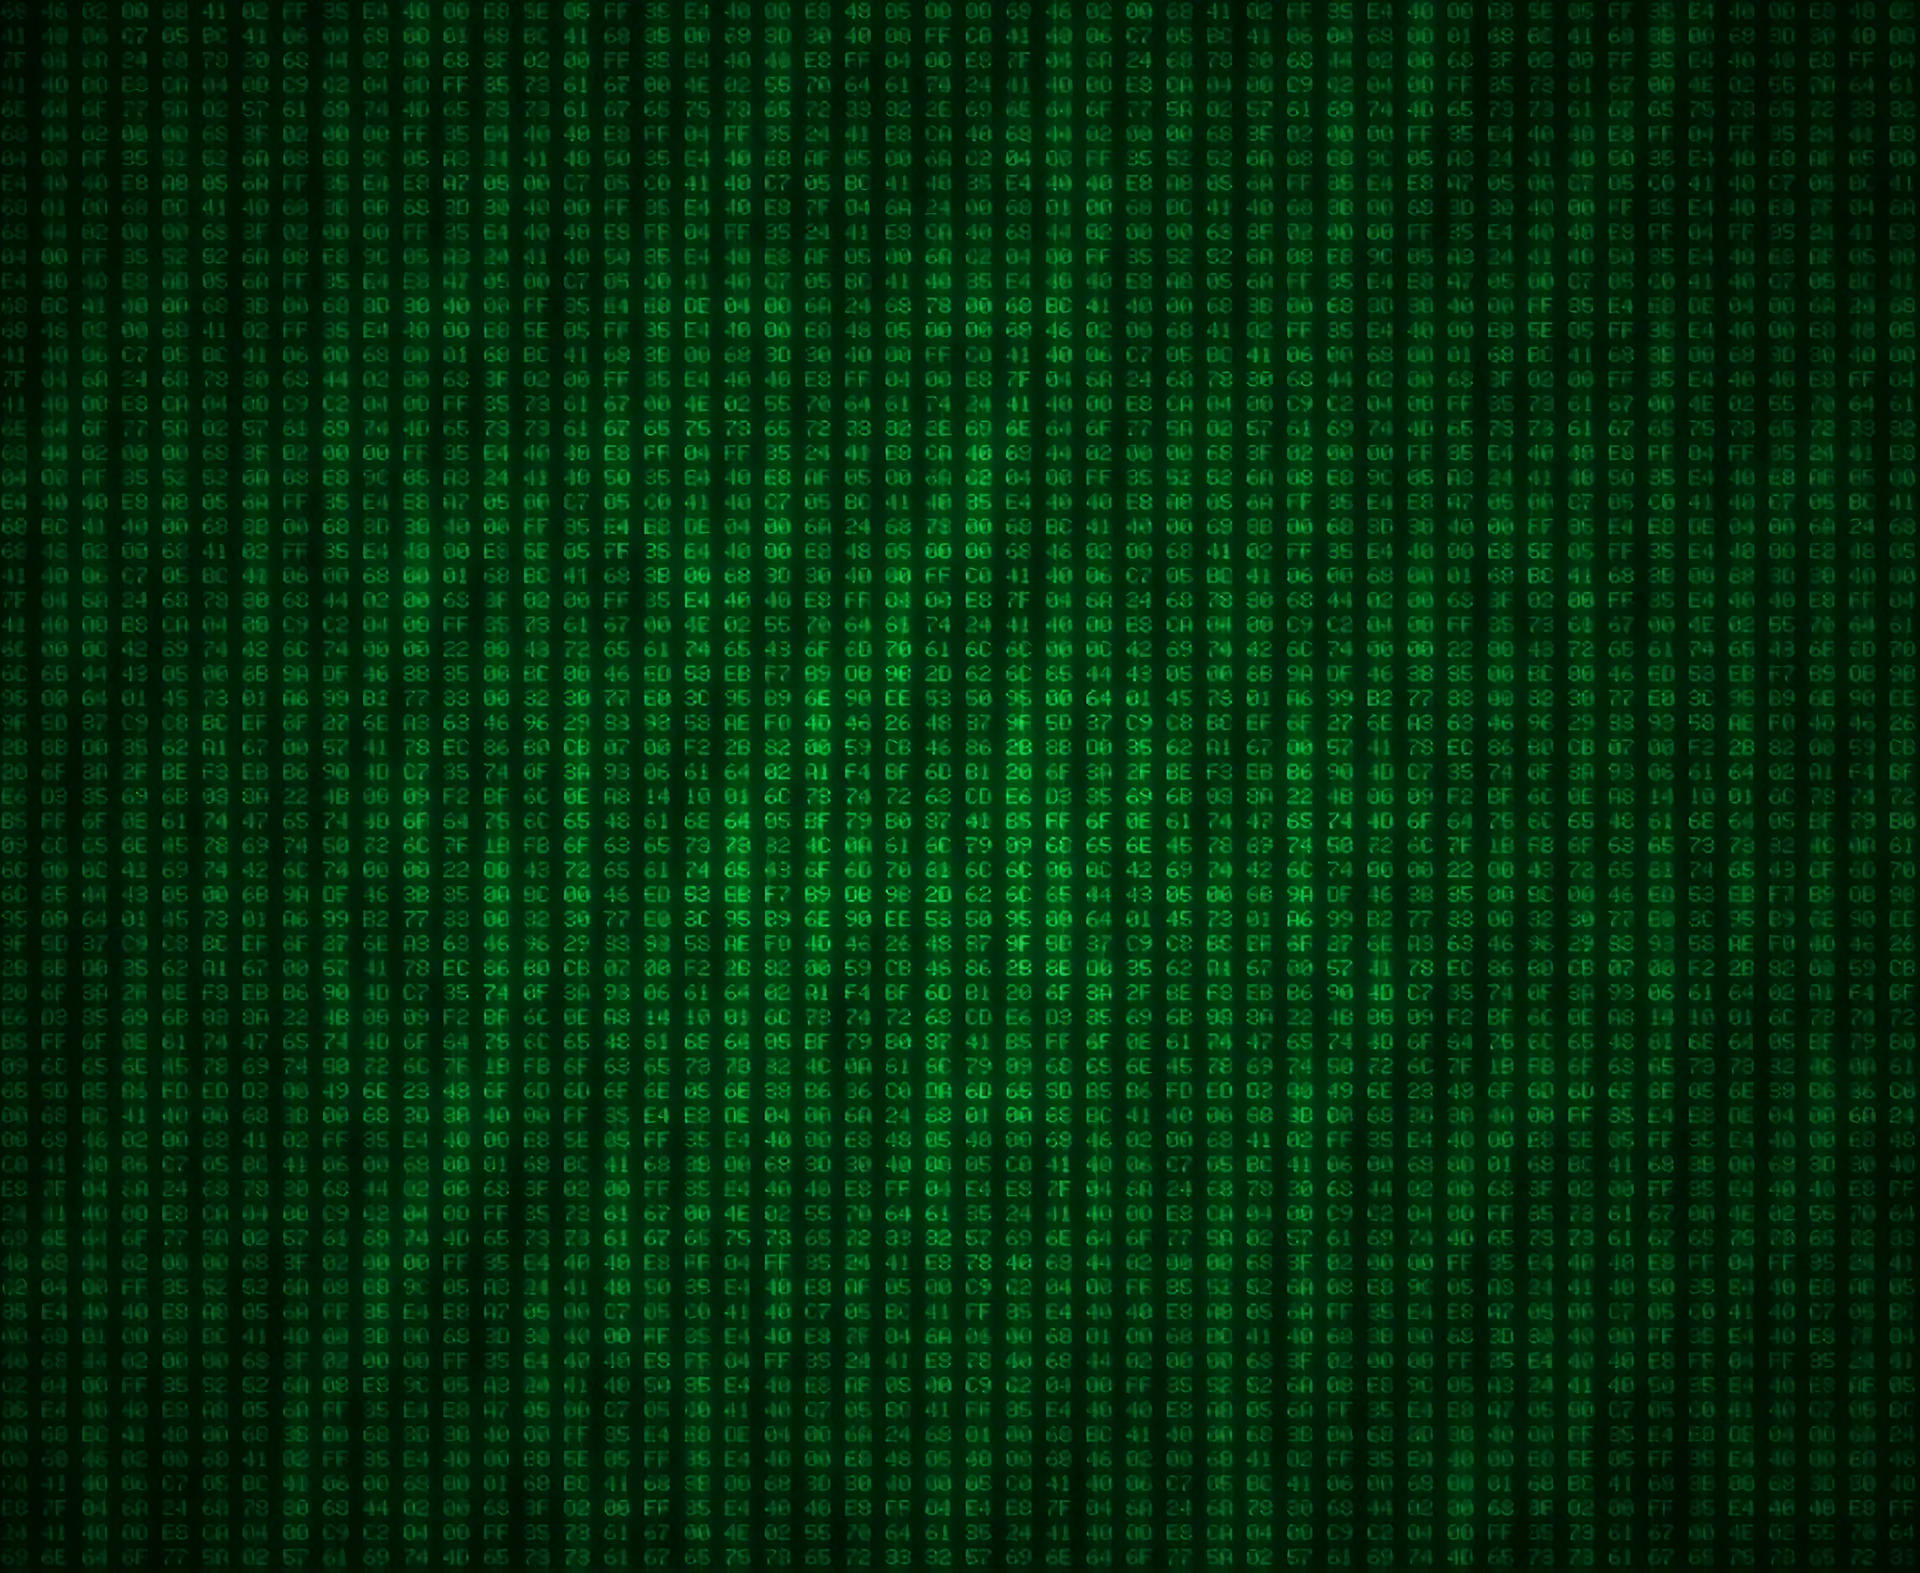 Hexadecimal Code, Numeral System, Numerals, Code, Hex, Green Background